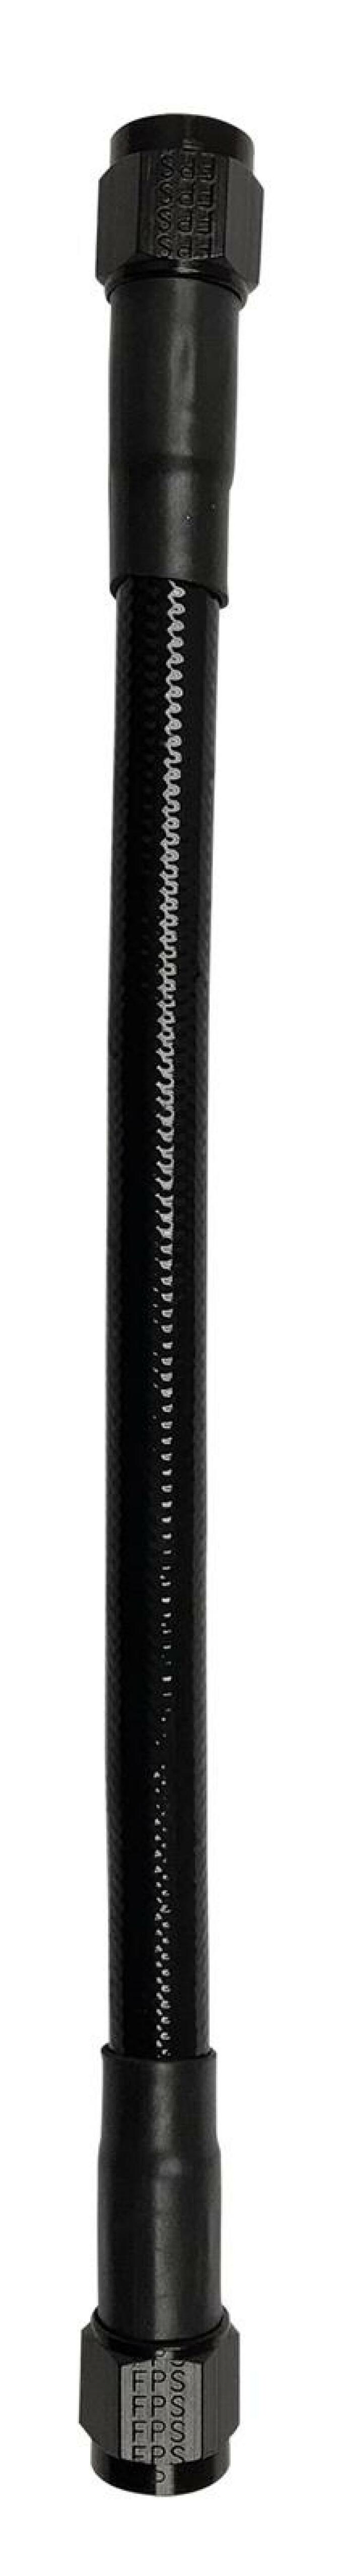 Fragola -6AN Ext Black PTFE Hose Assembly Straight x Straight 96in - 6026-1-1-96BL